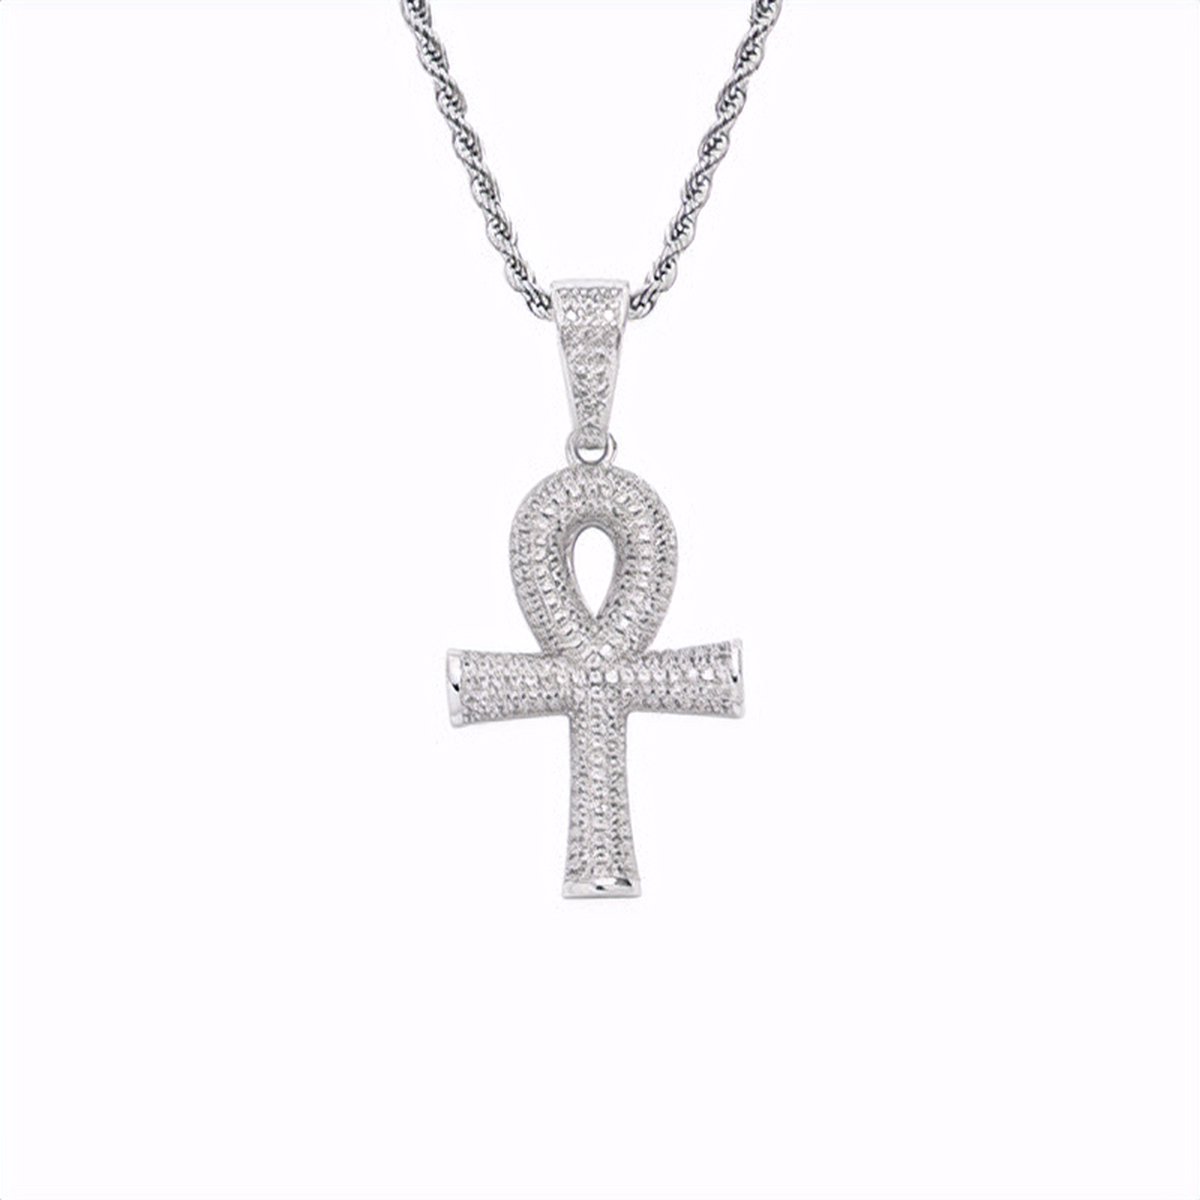 ICYBOY 18K Heren Ketting met Religieus Egyptisch Kruis / Ankh Verguld Zilver [SILVER-PLATED] [ICED OUT] [24 INCH - 61CM] - Religious Egypt Jewelry Hips Hops Ankh Cross Pendant Necklace